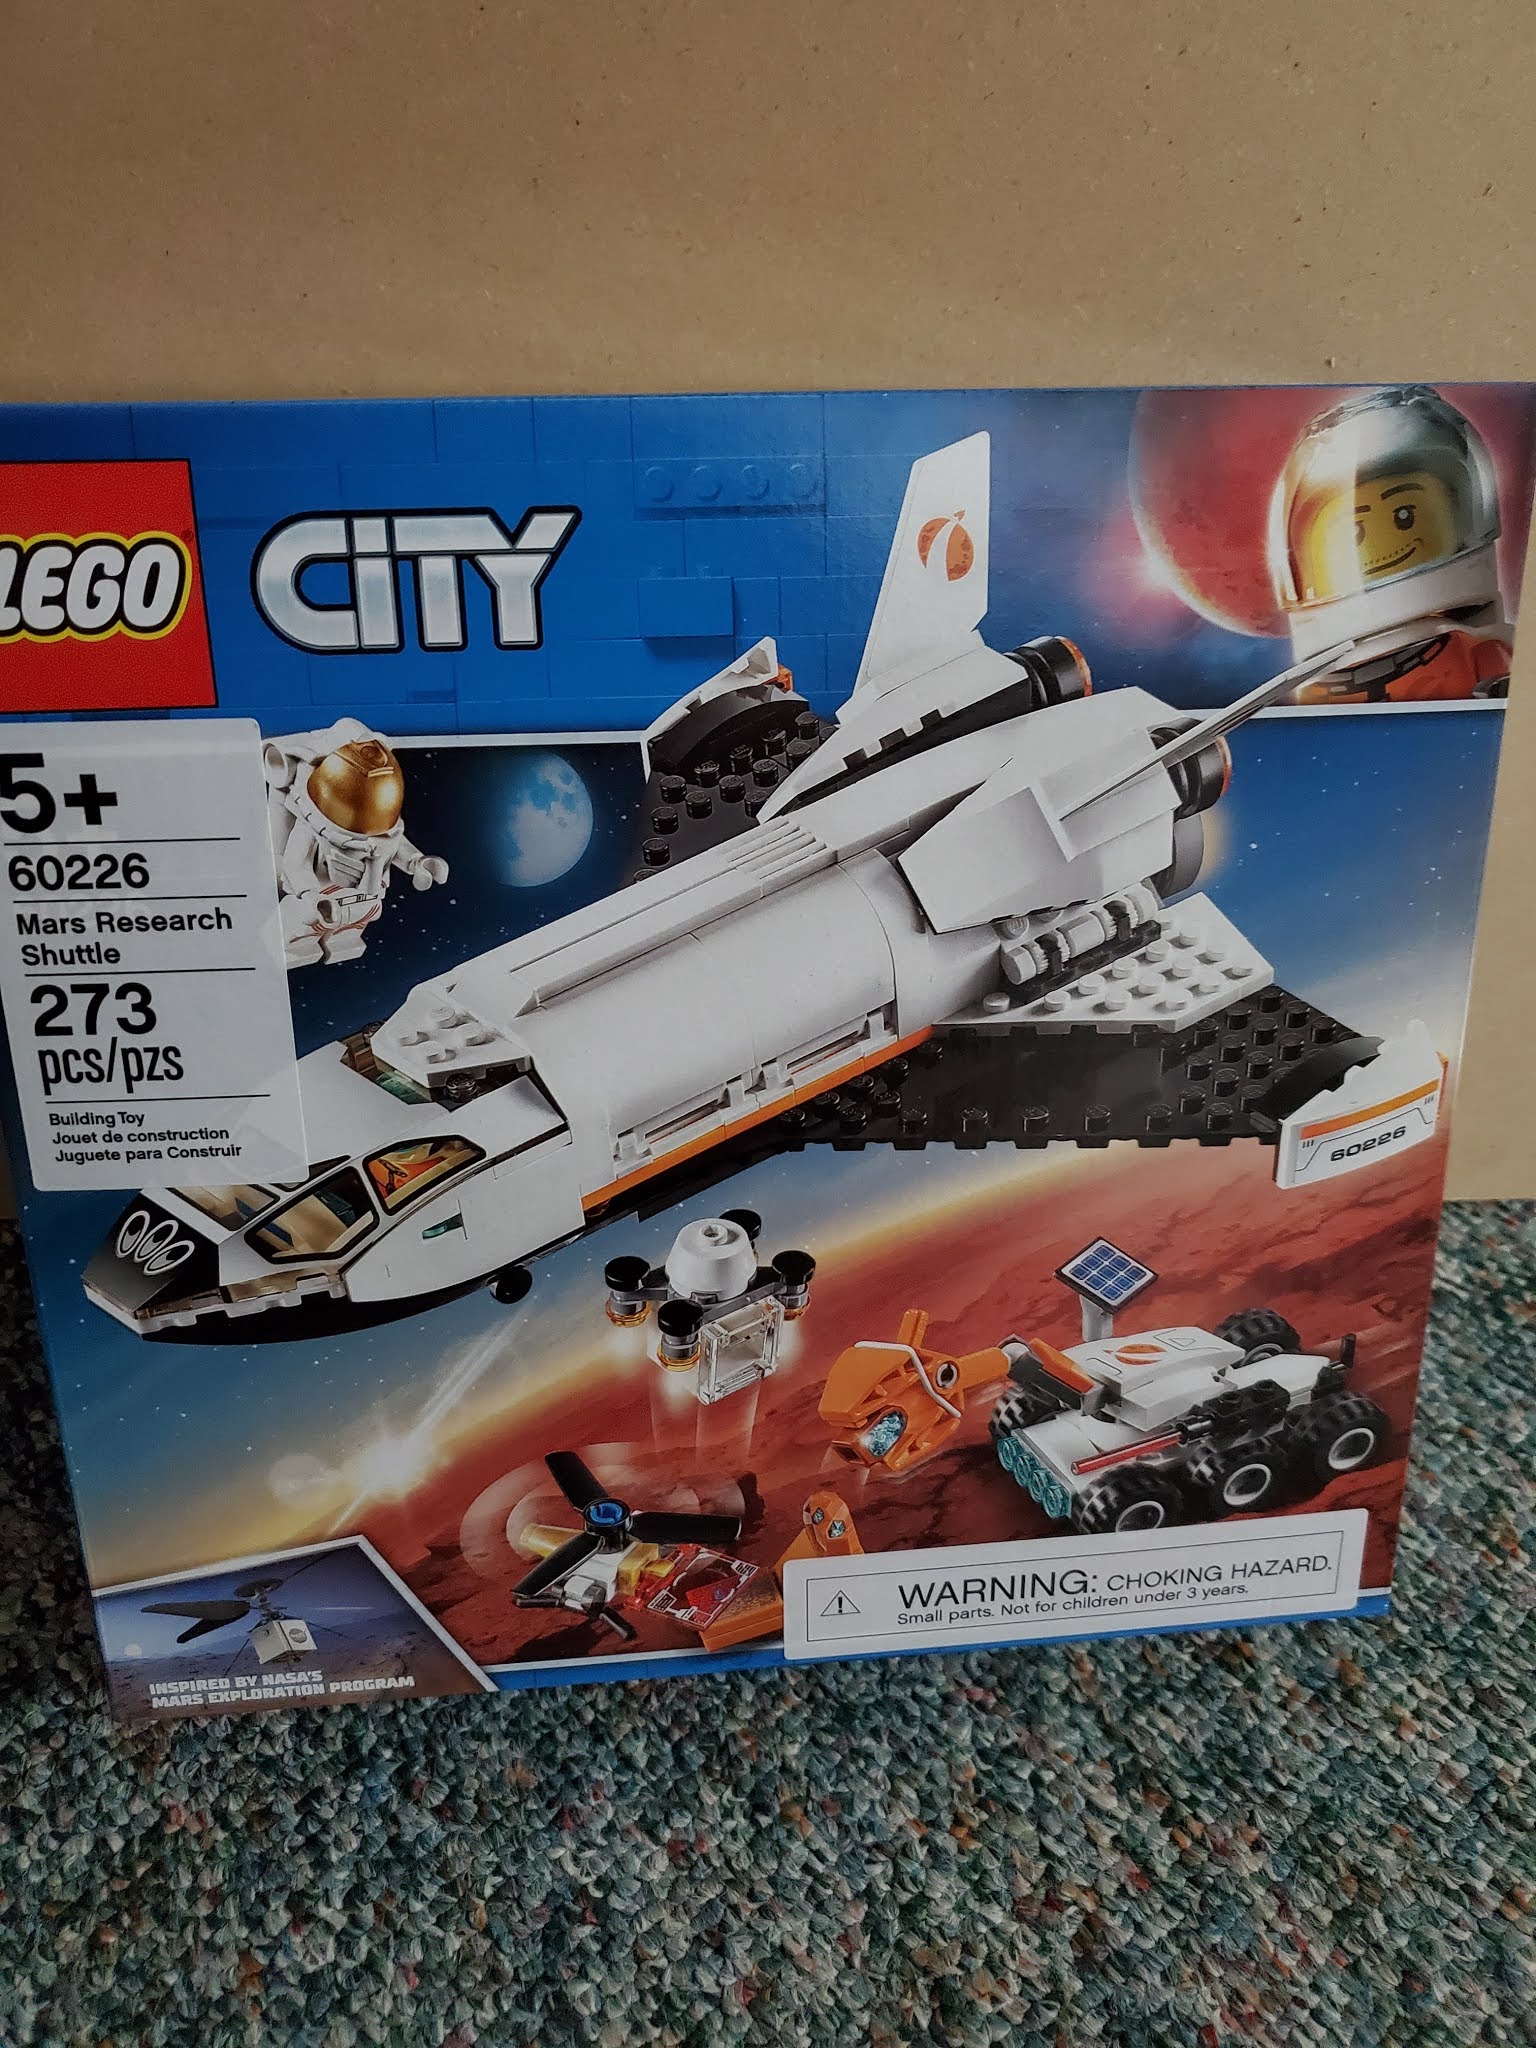 Mars Research Shuttle - LEGO - REVIEW